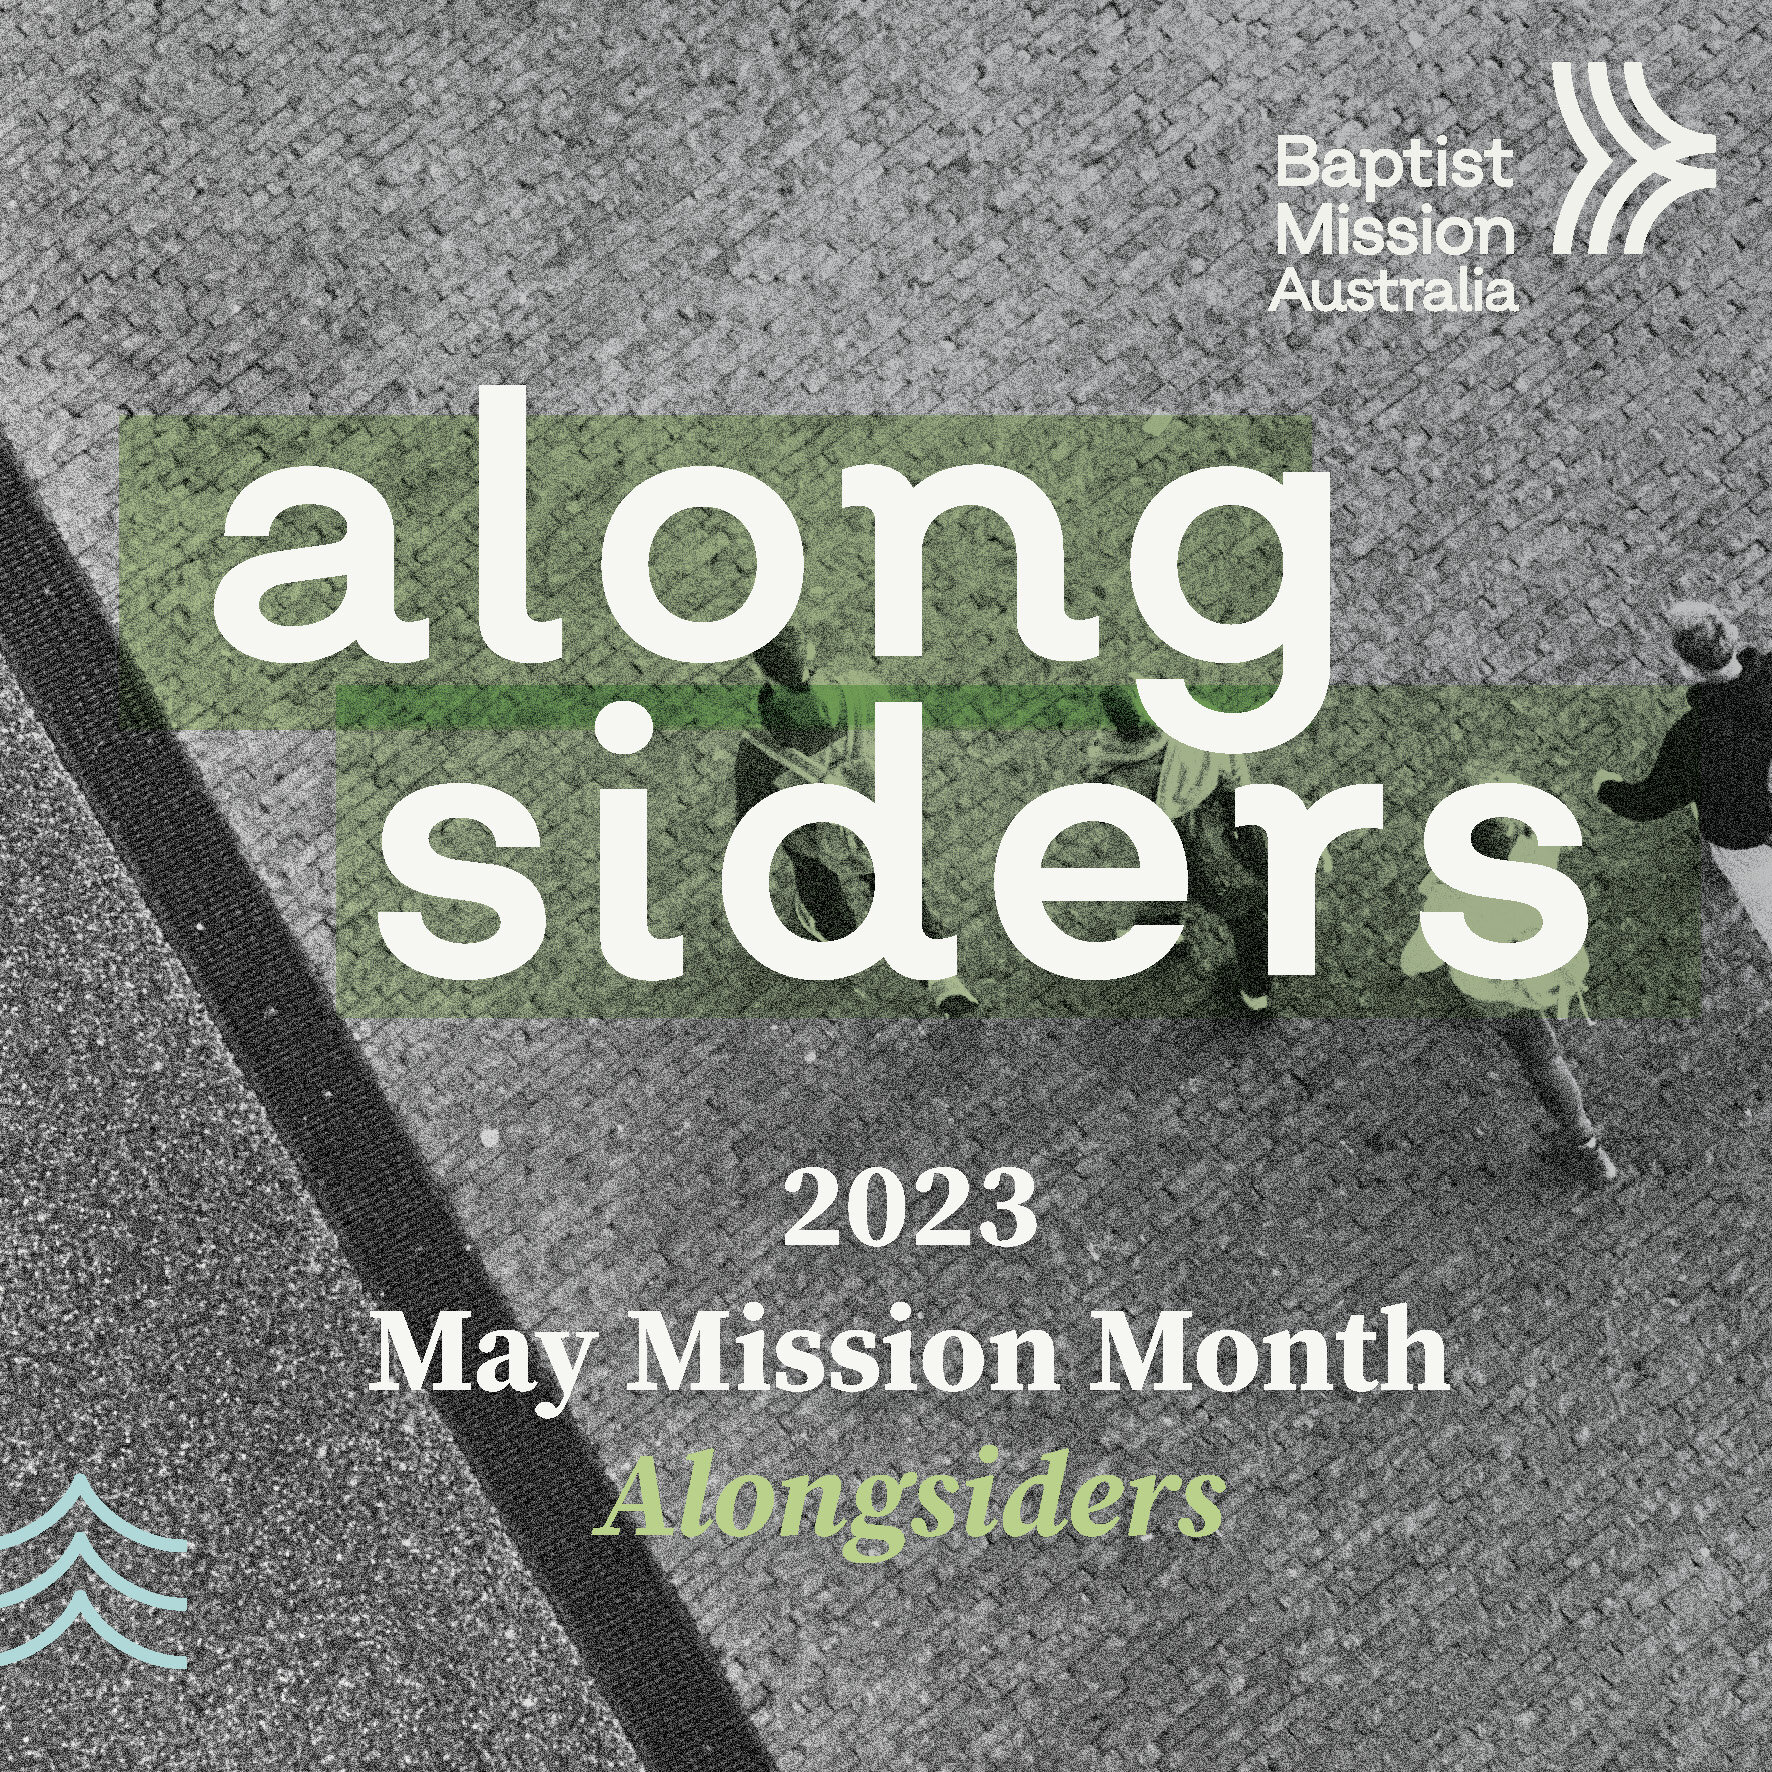 Looking forward to exploring more of the BMA Alongsiders material this Sunday @ 9:30am for May Mission Month.
Join us online or in person.